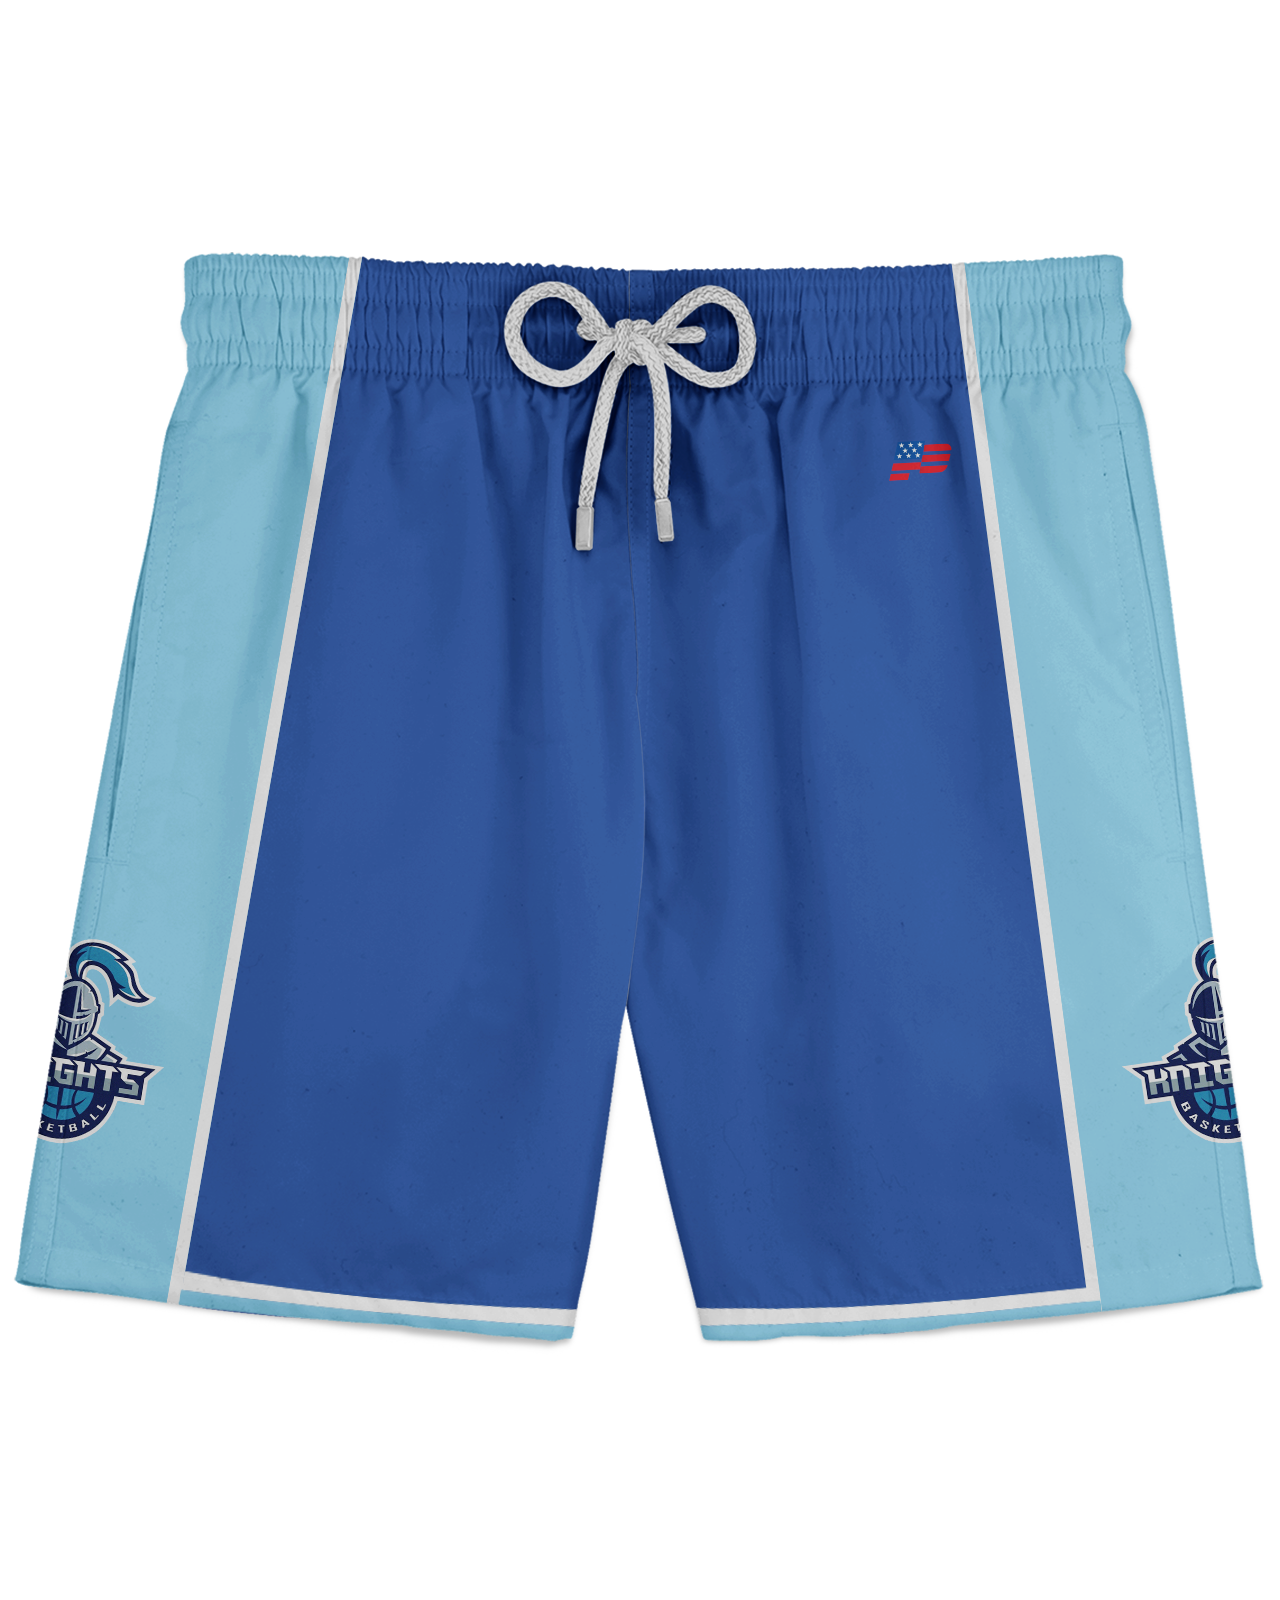 BASKETBALL Athletic Shorts  Patriot Sports  Front View.   printed all over in HD on premium fabric. Handmade in California.